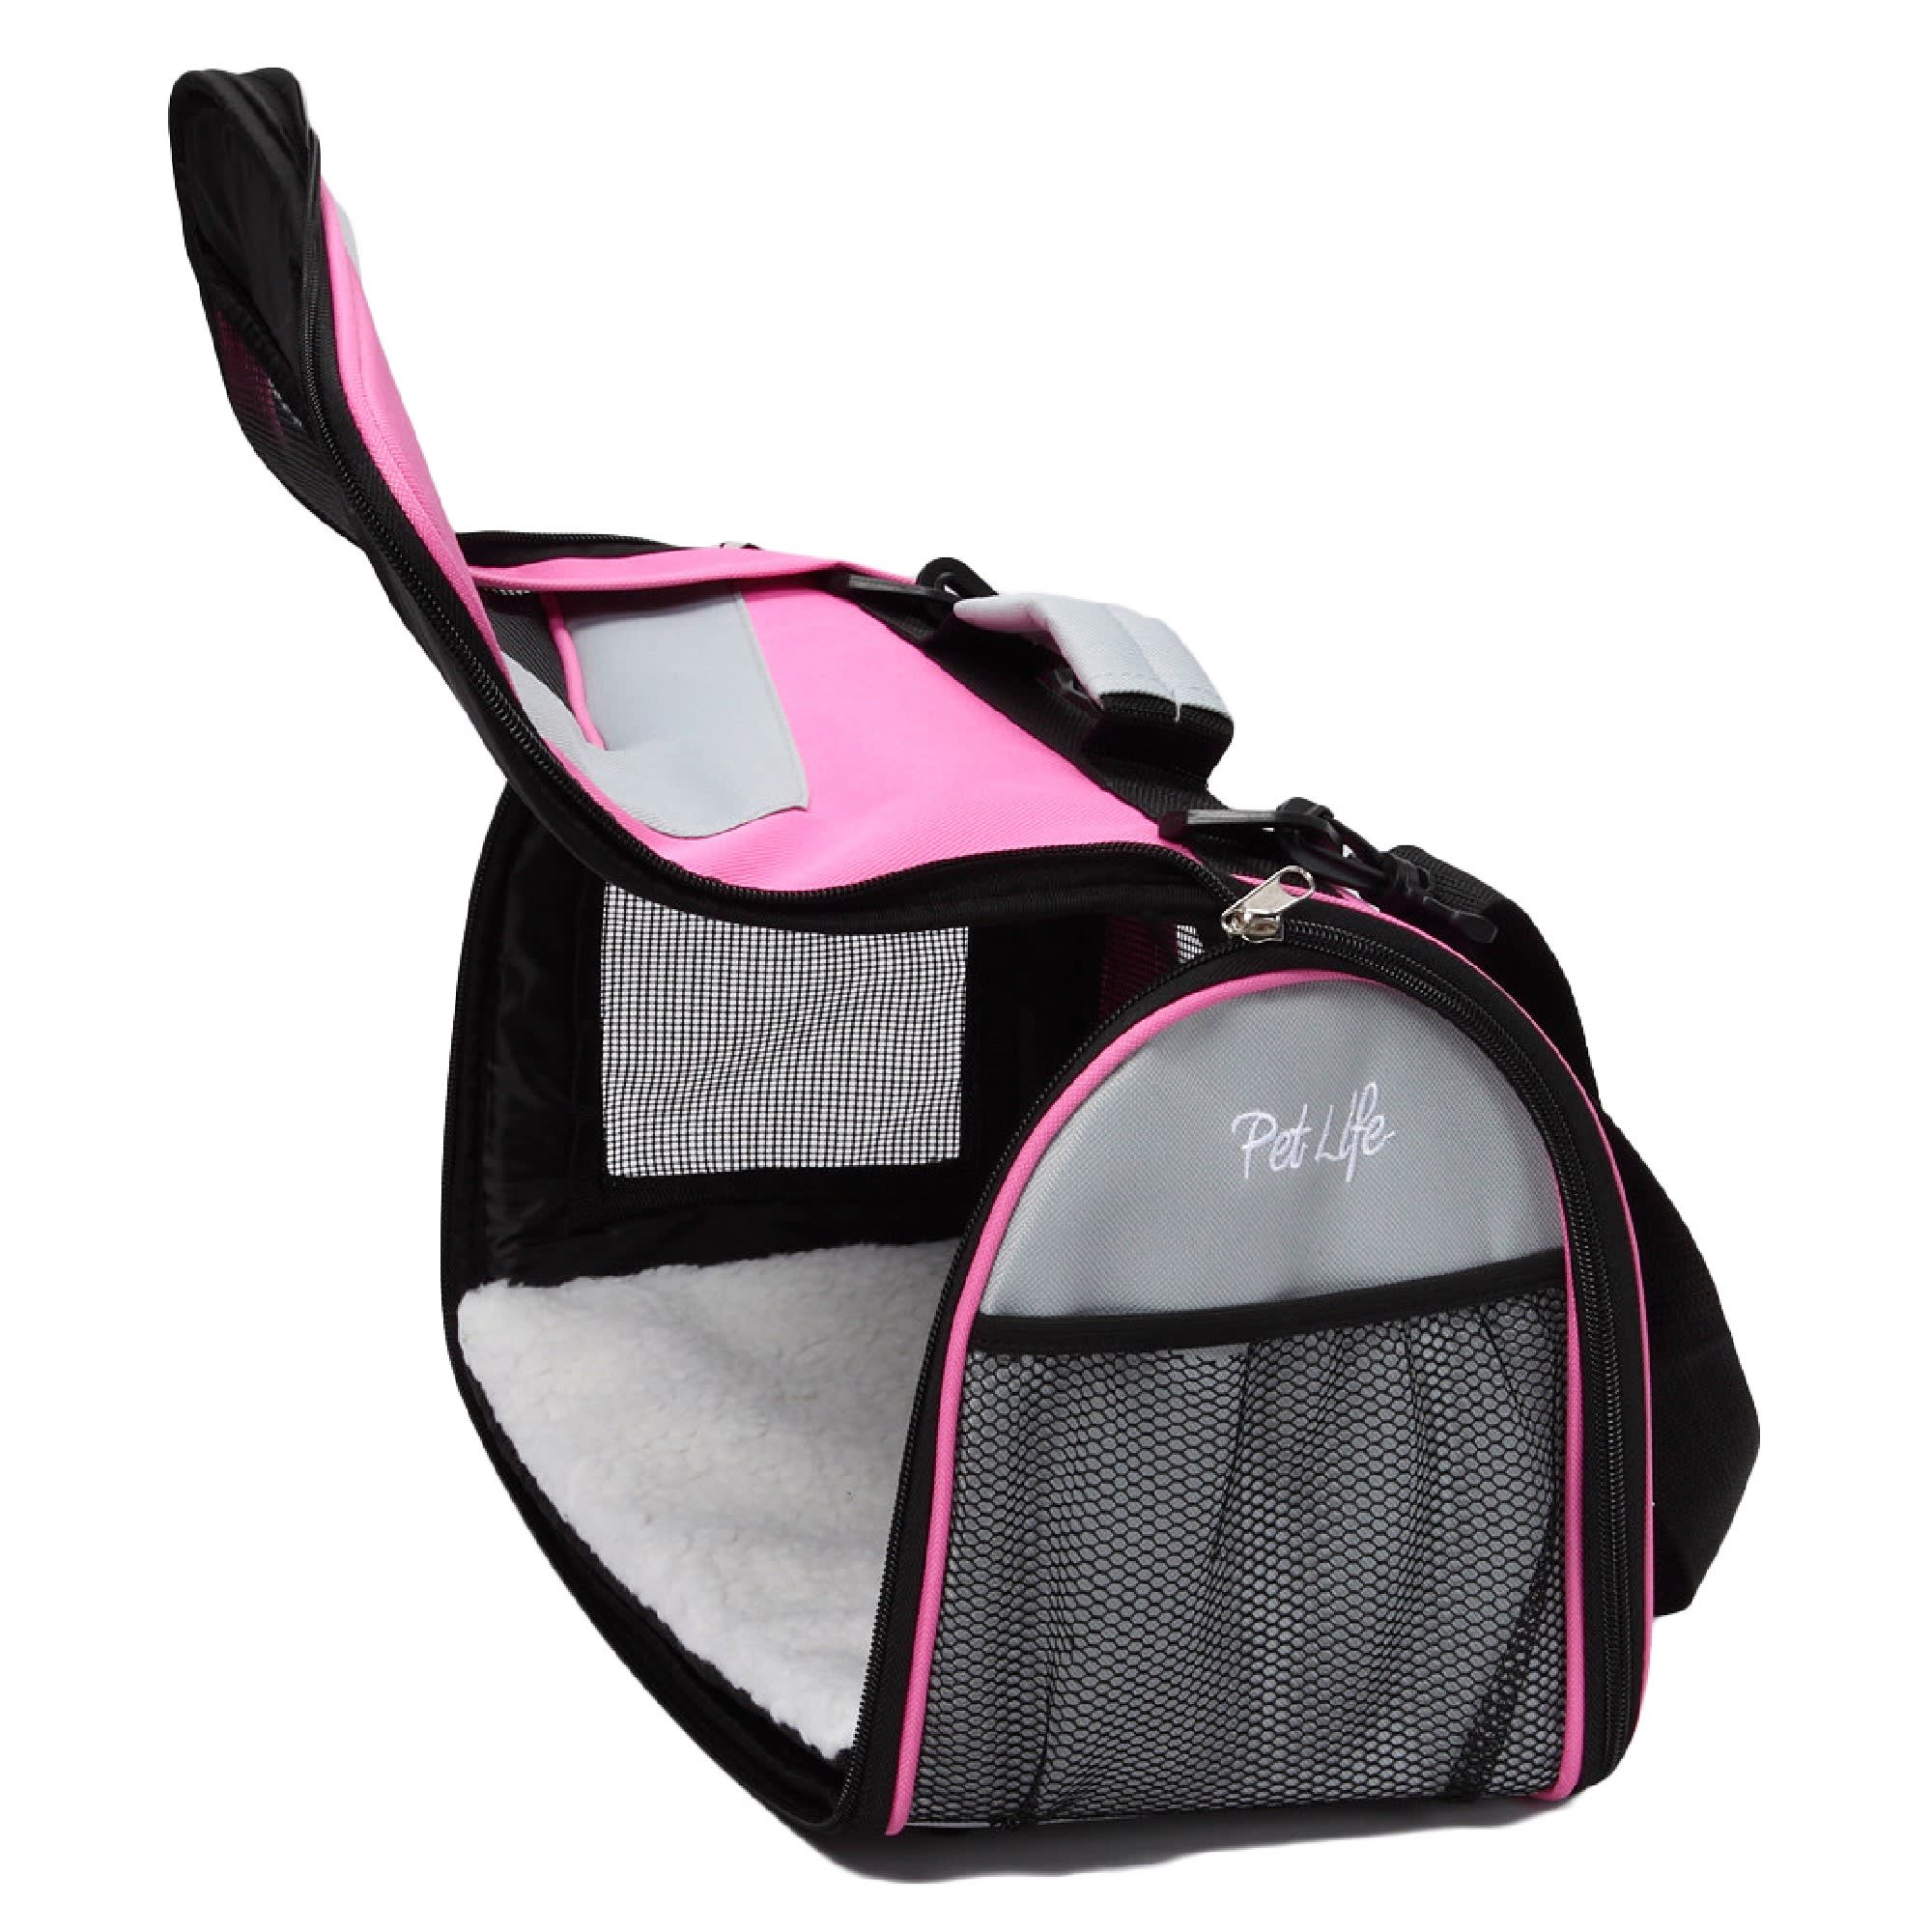 Siivton Airline Approved Foldable Pet Carrier - Sears Marketplace